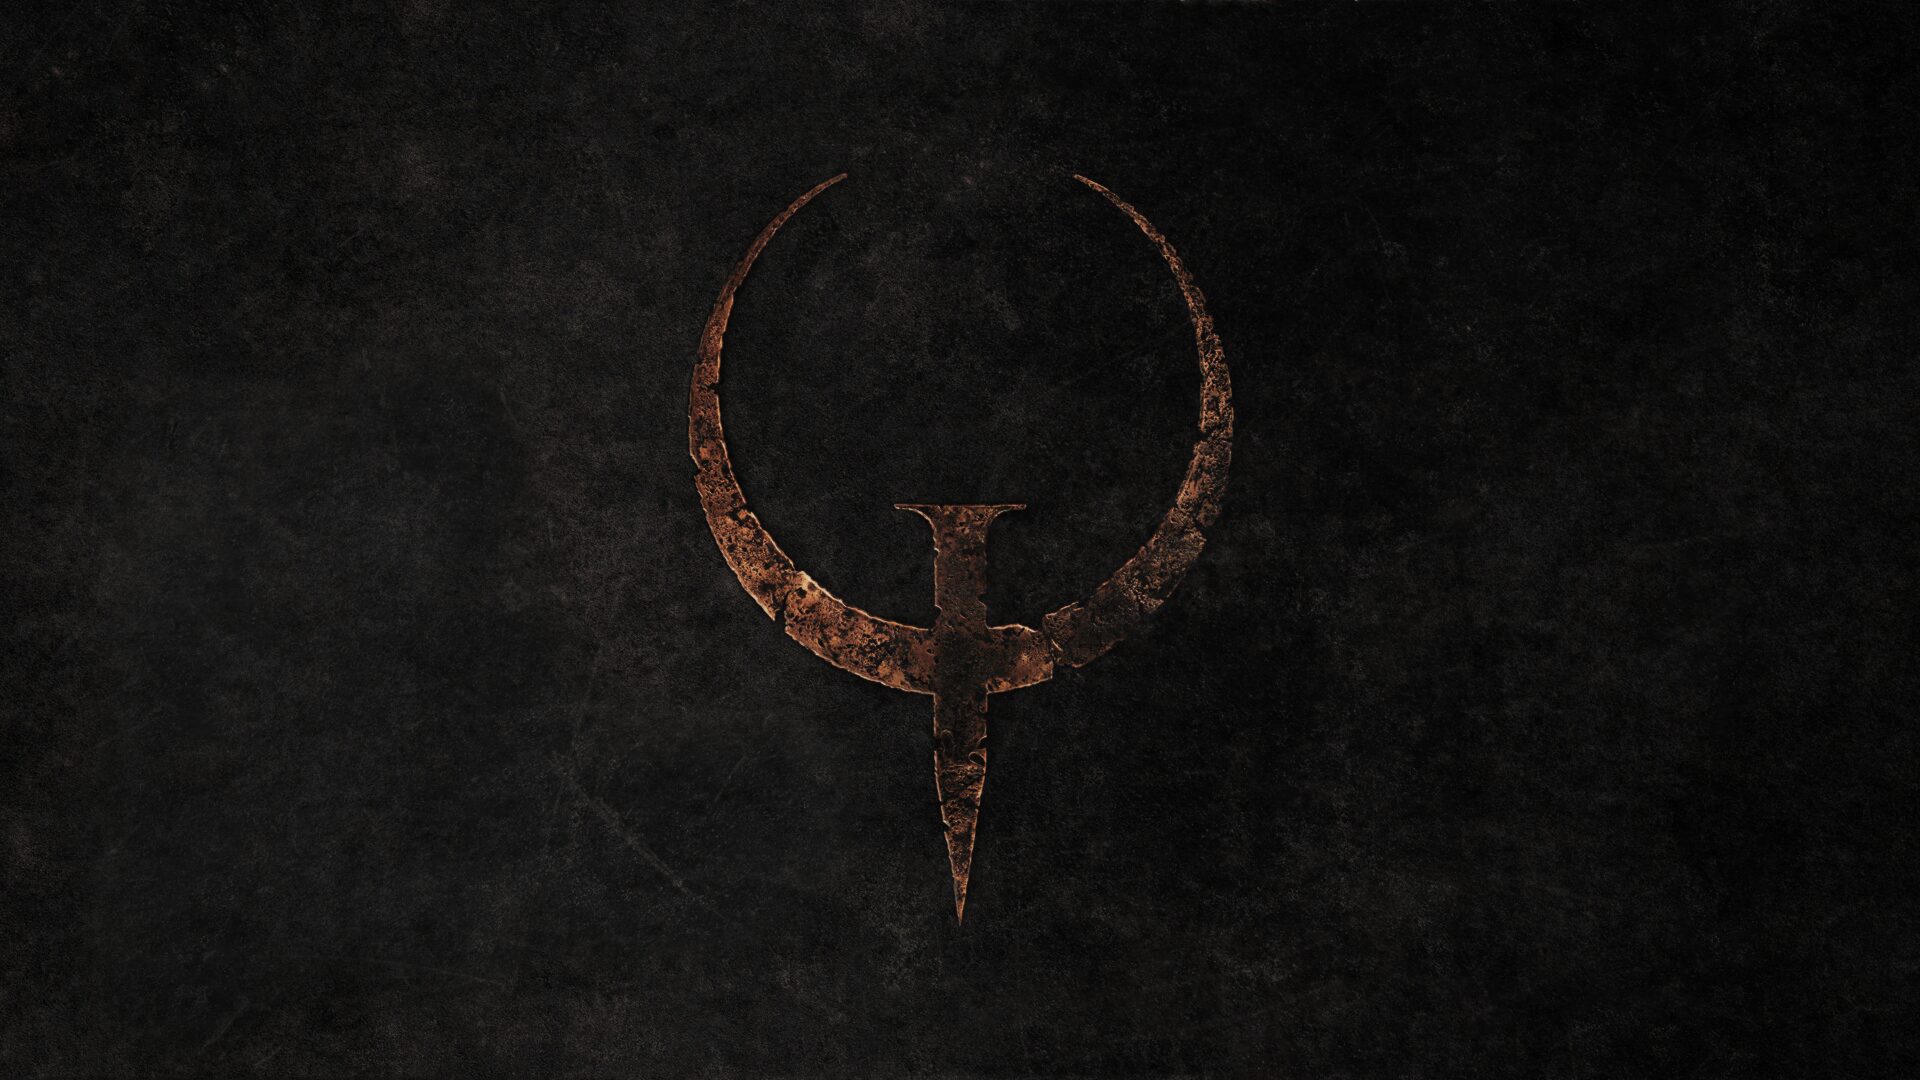 D.I.C.E. 2017 Will Pit Top Games Executives Against Each Other In 1v1 Quake Matches